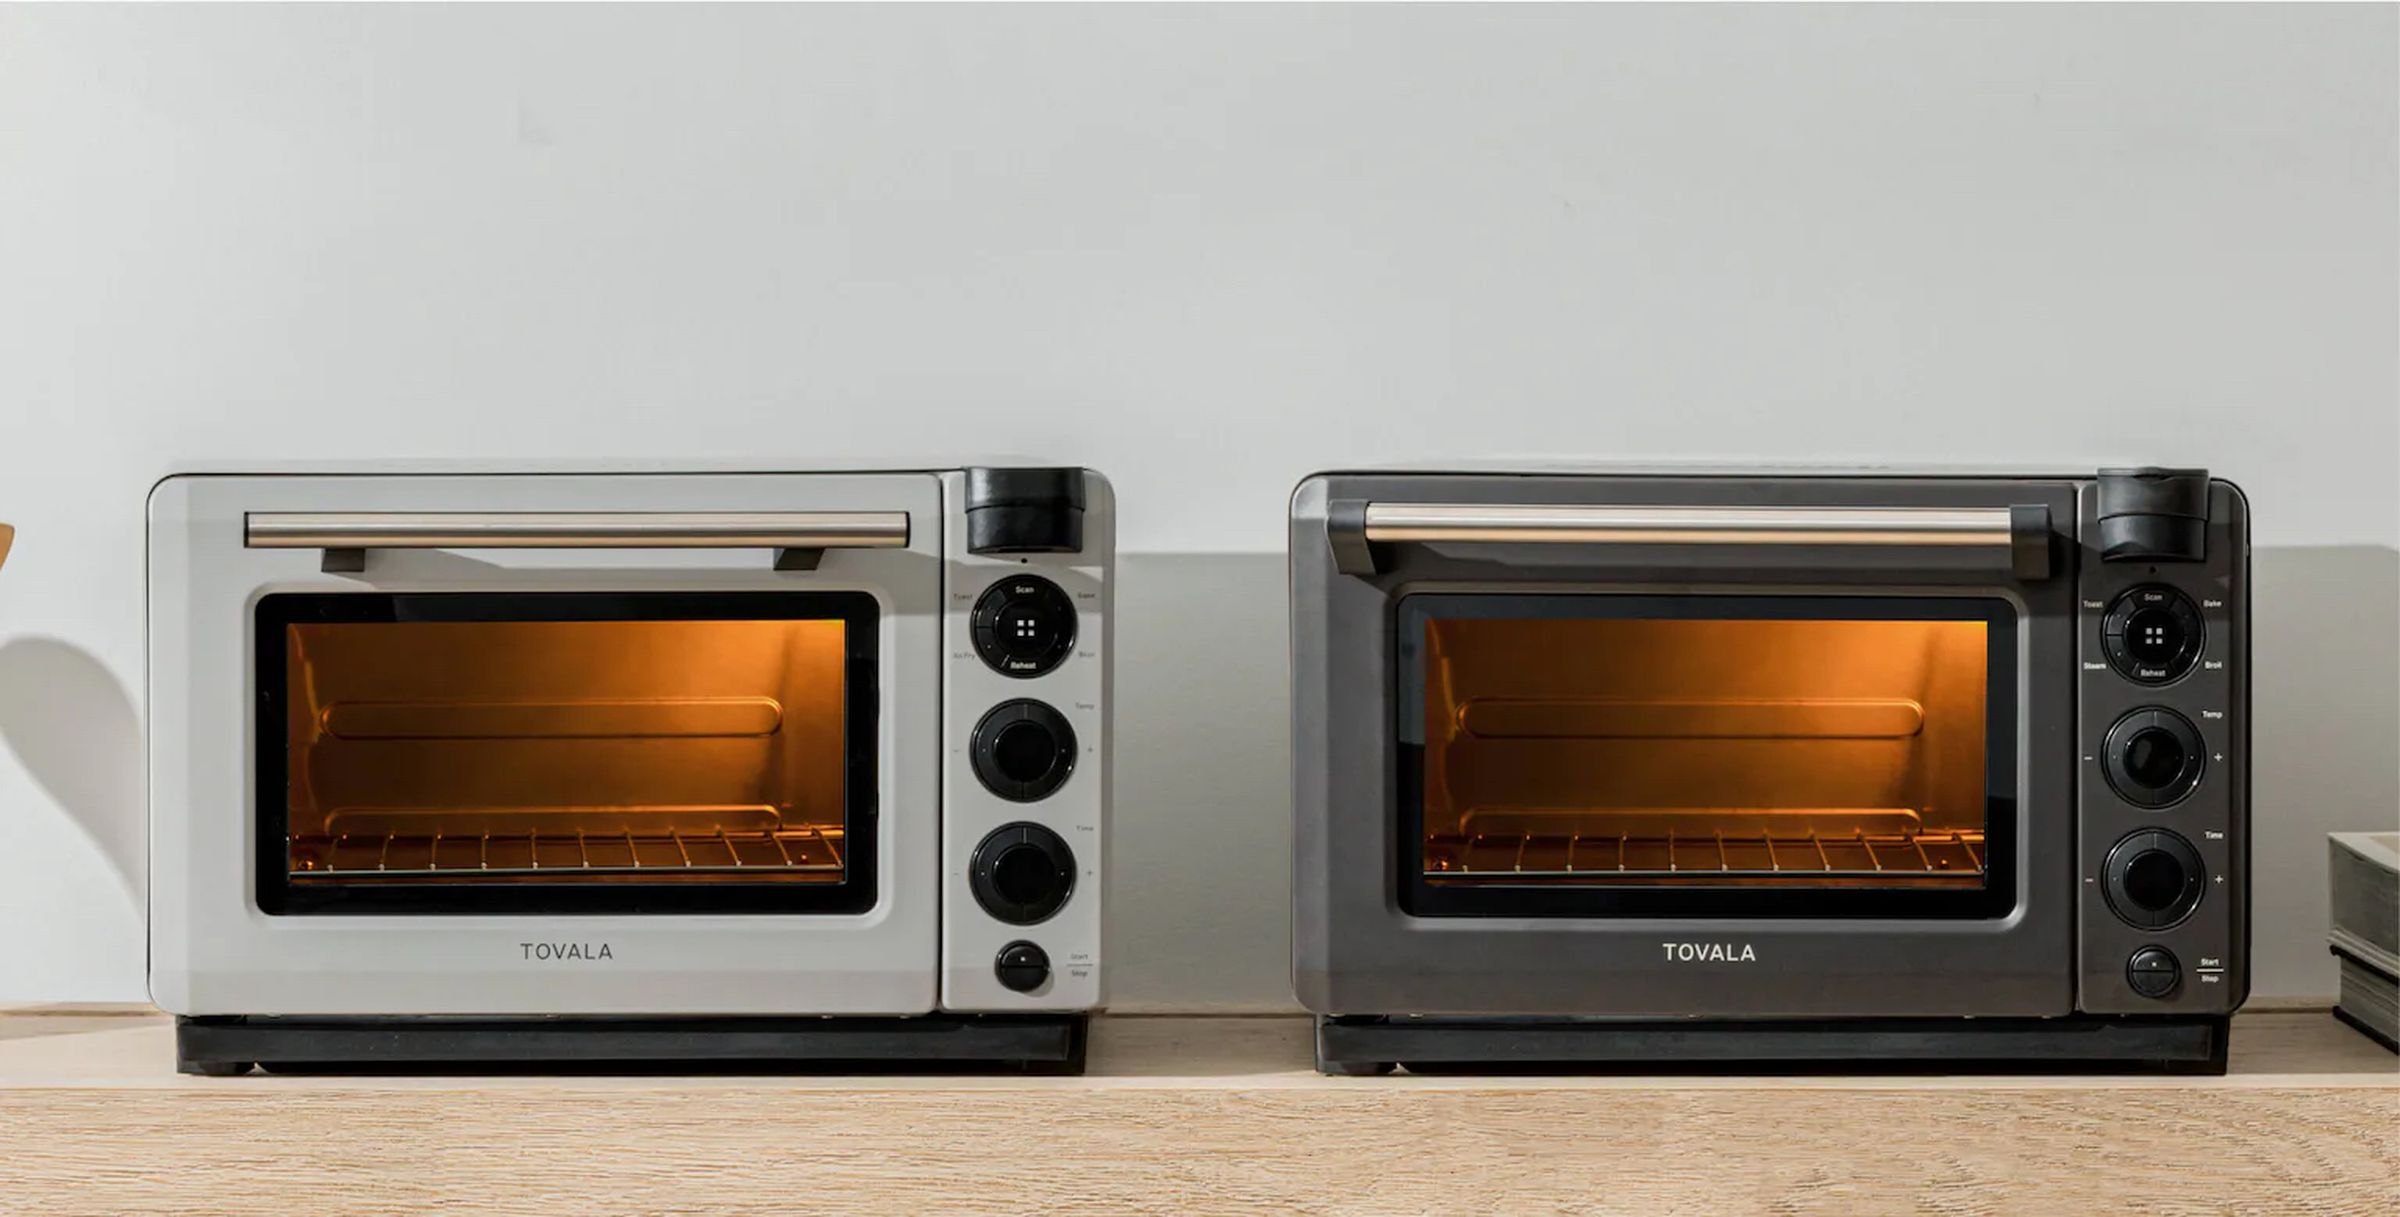 The new Tovala Smart Oven Air Fryer (left) joins Tovala’s Pro oven as the company’s cheaper option.